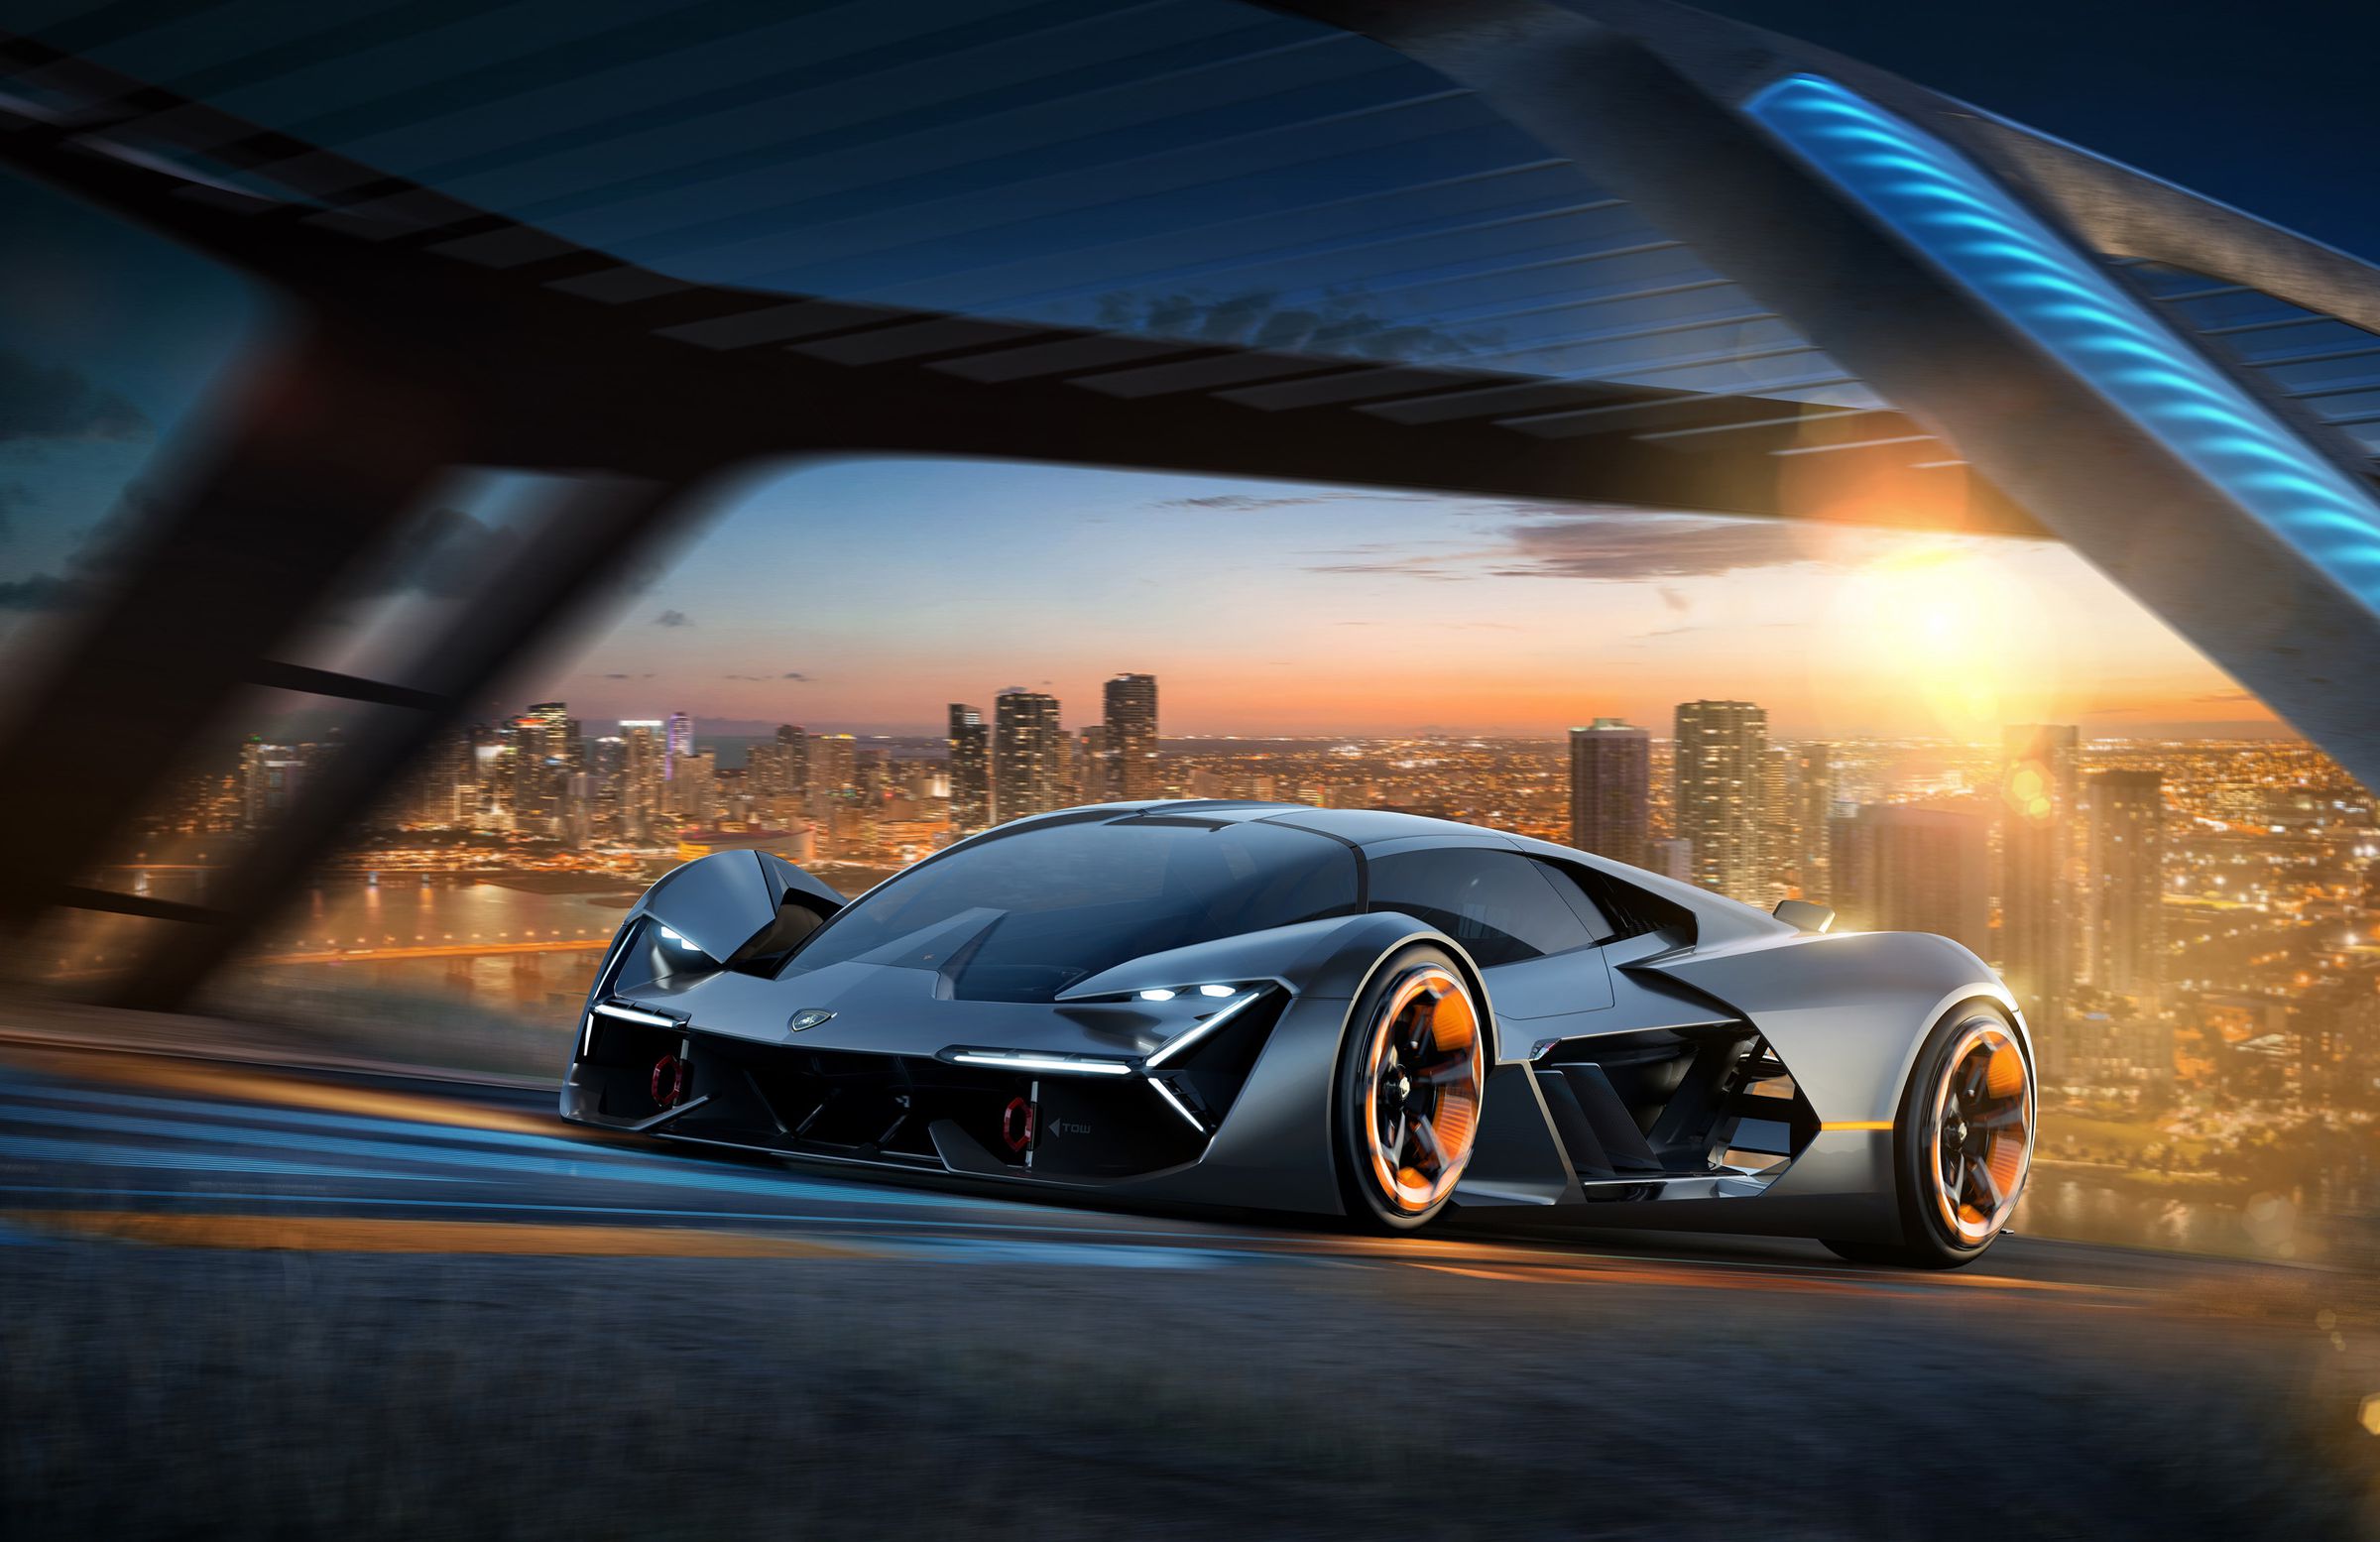 The Terzo Millennio is a “technological demonstrator” of what an electric Lamborghini could look like.